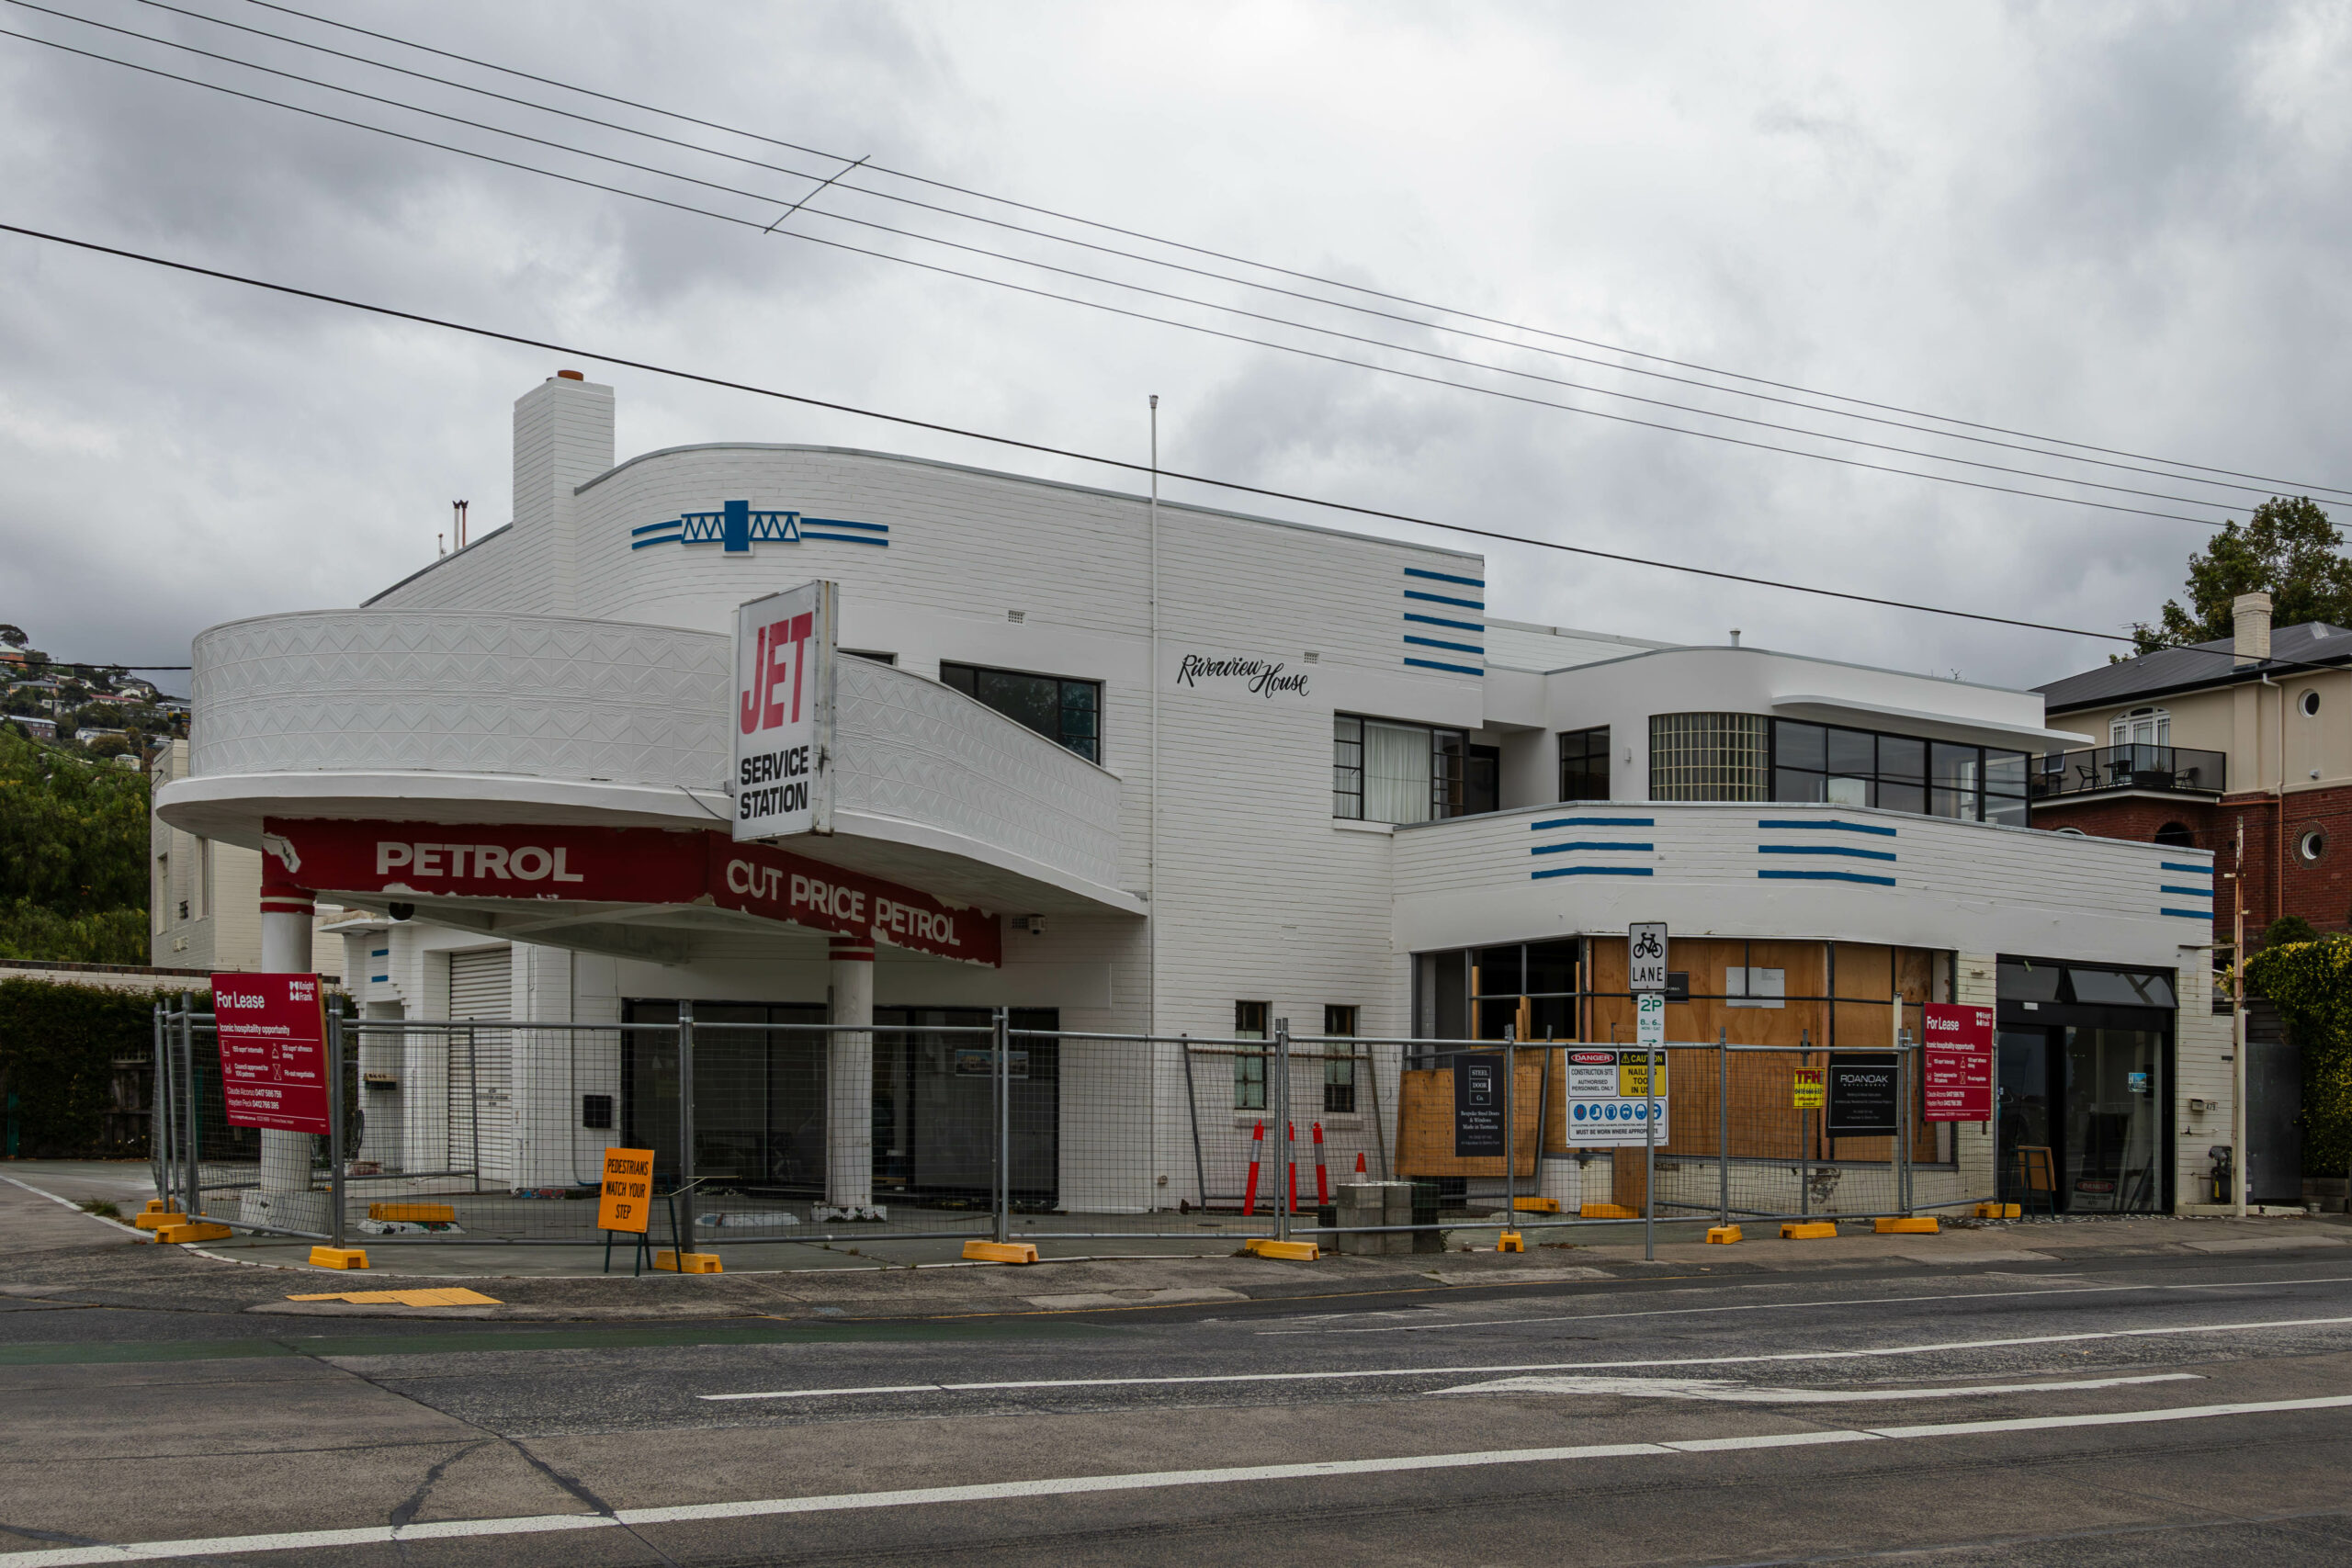 An art deco service station painted in white with blue trim undergoing renovations